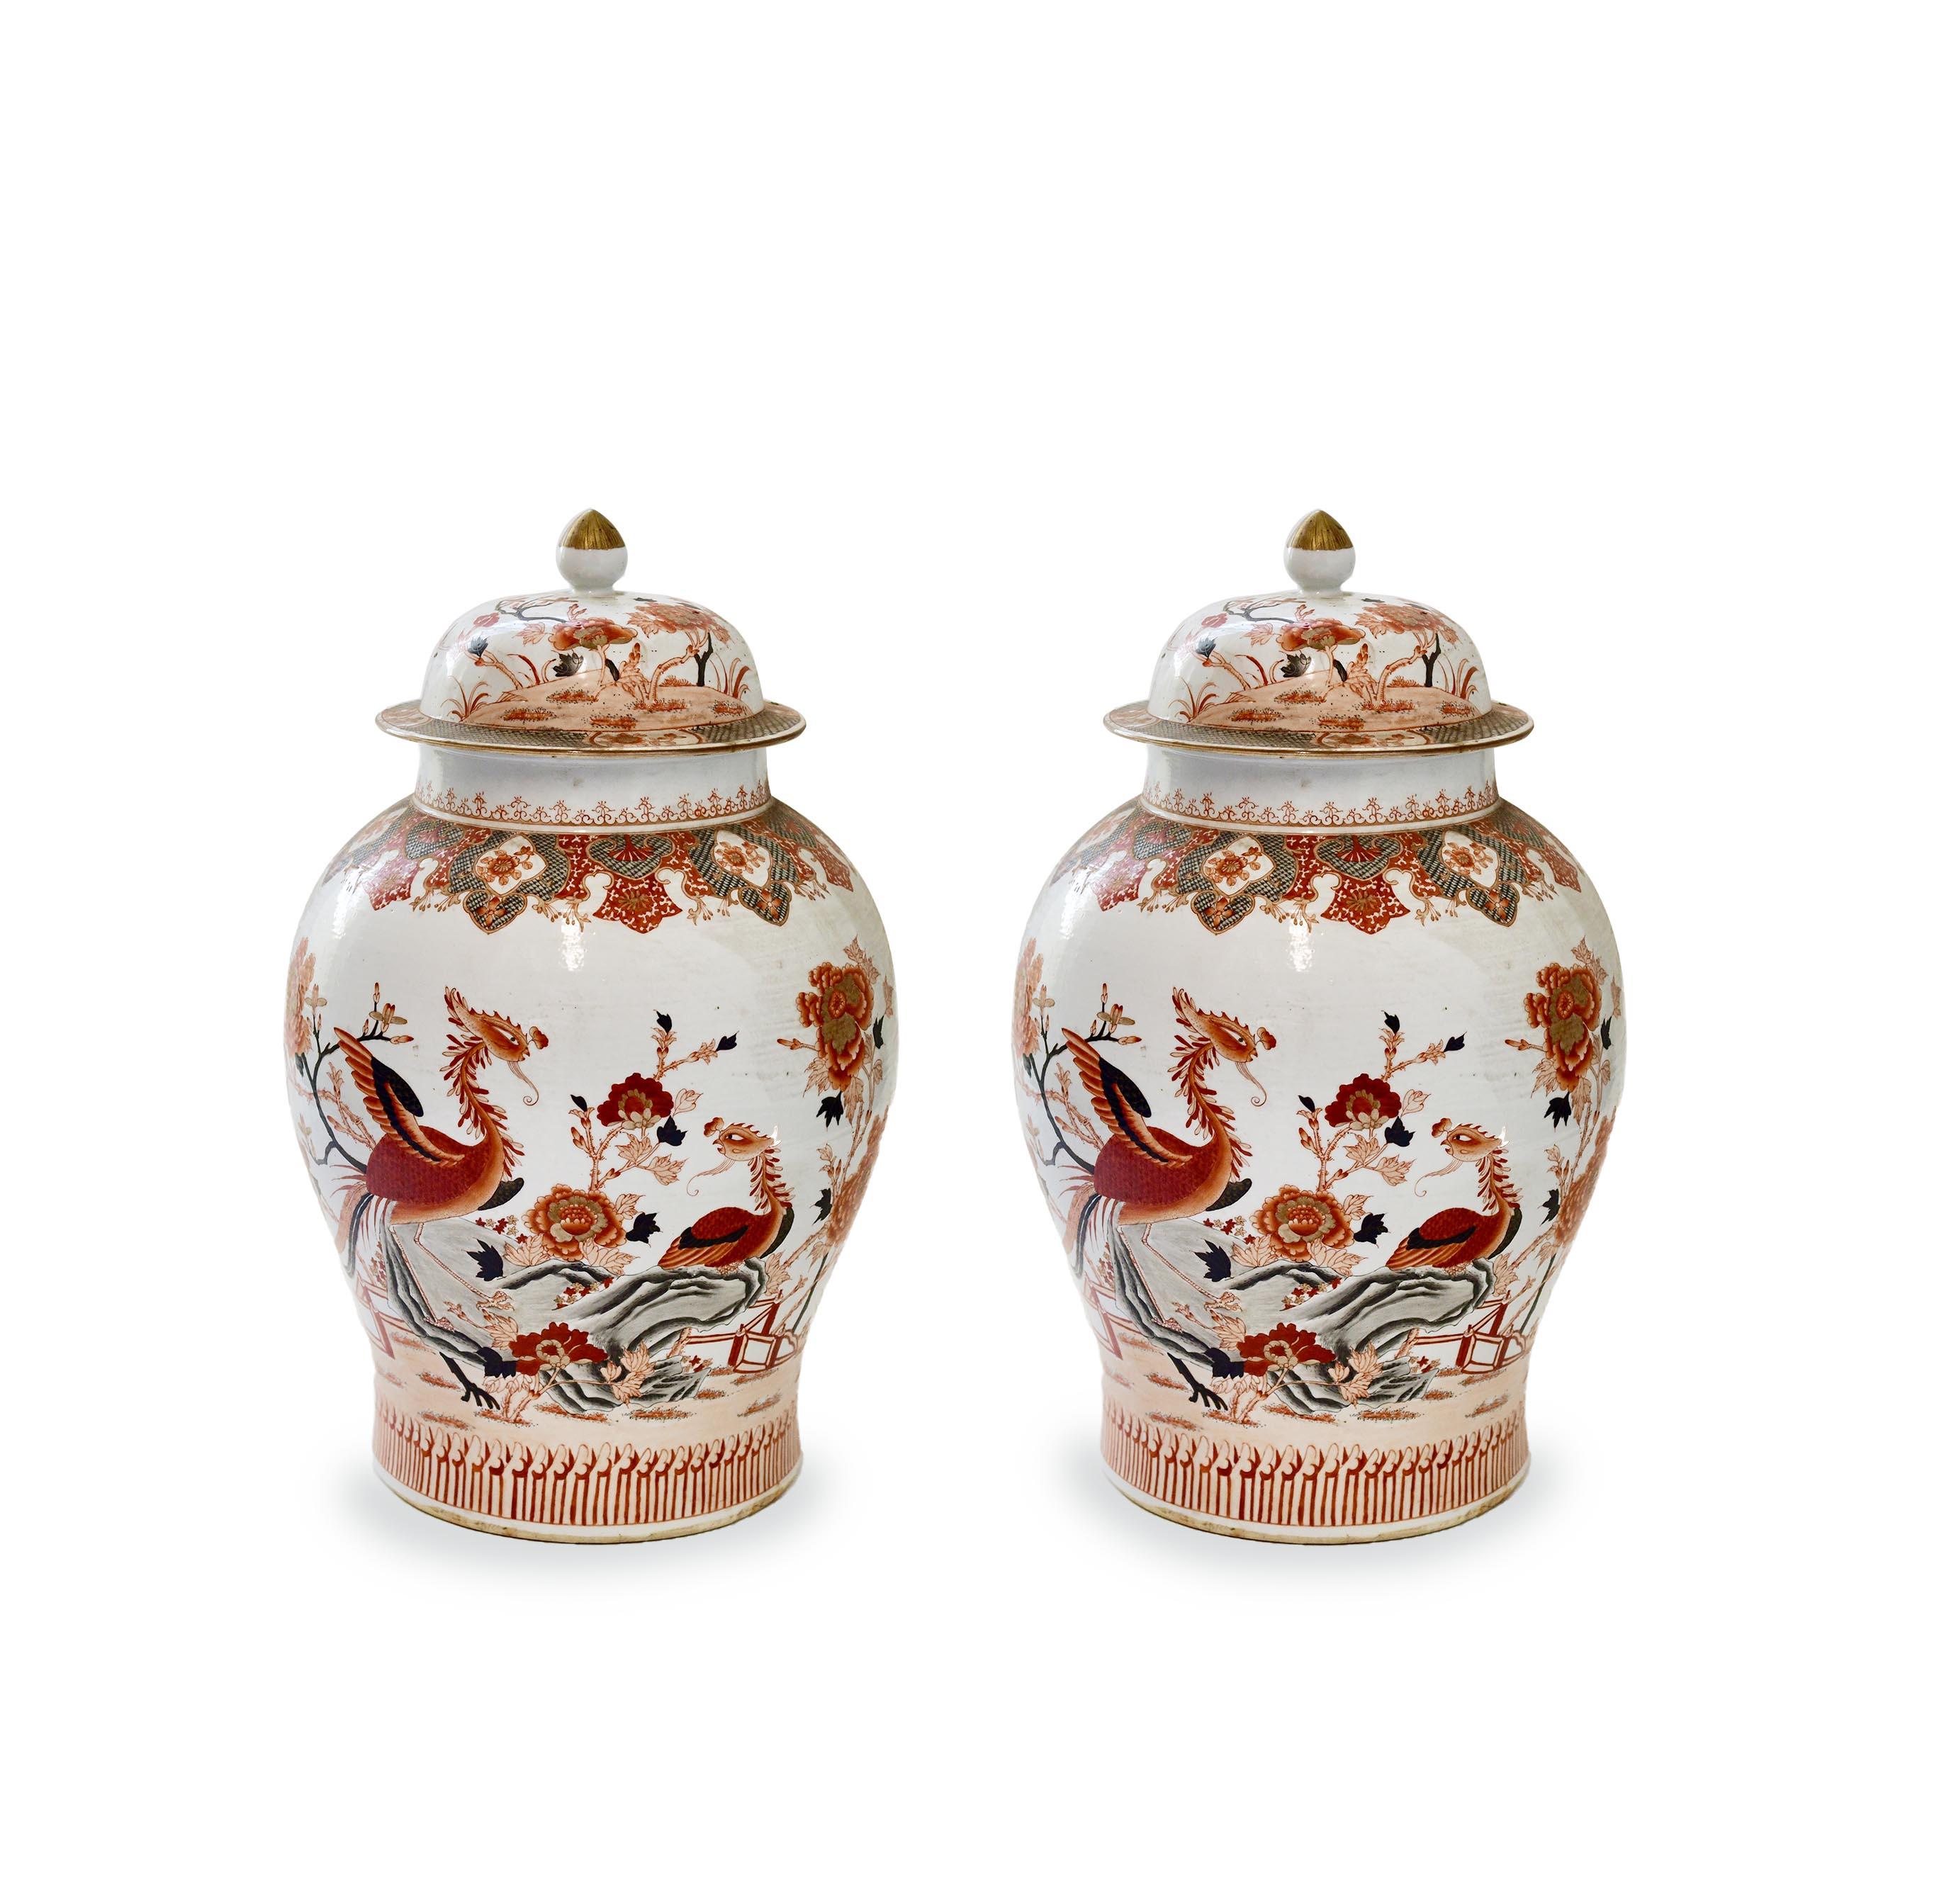 Fine painted porcelain vases with birds and flowers bloom decoration.
The bottom of the porcelain is 10.5in/D.